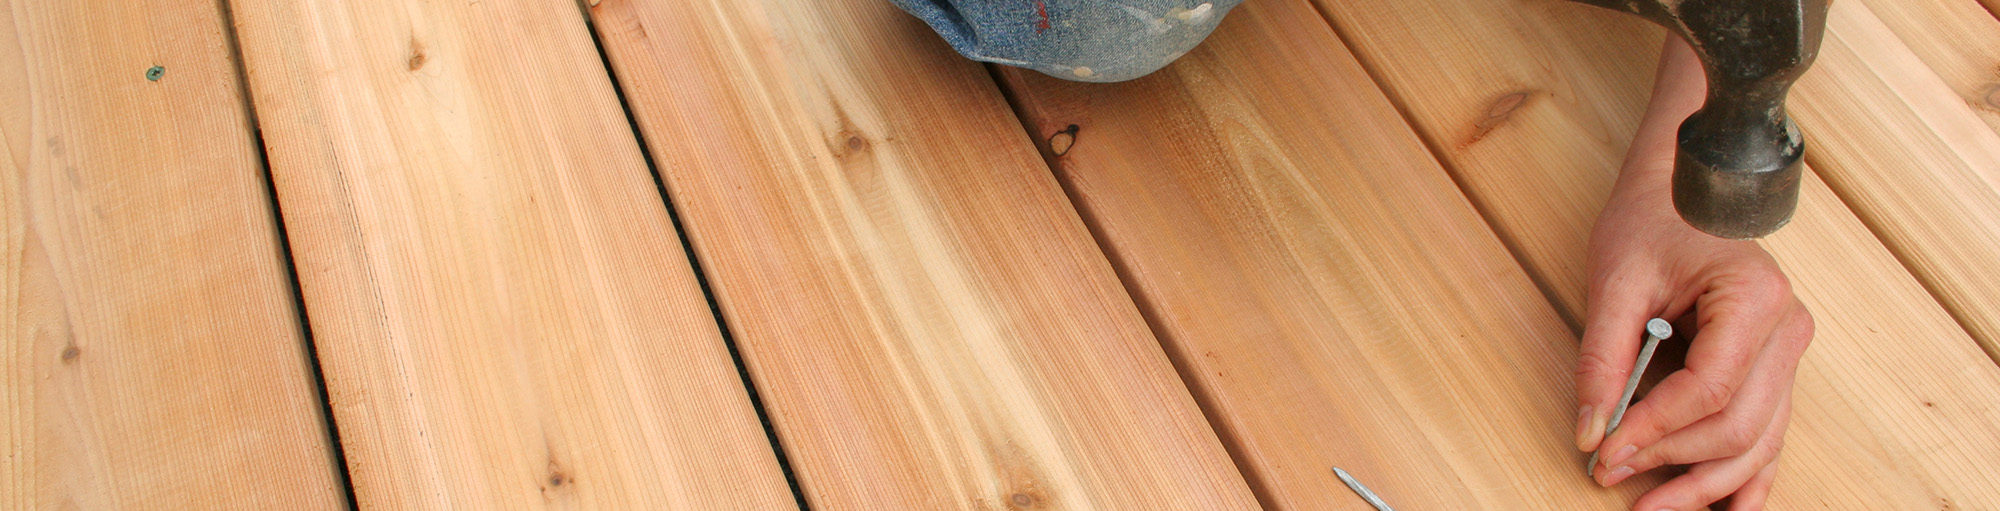 Wooden decking being nailed down